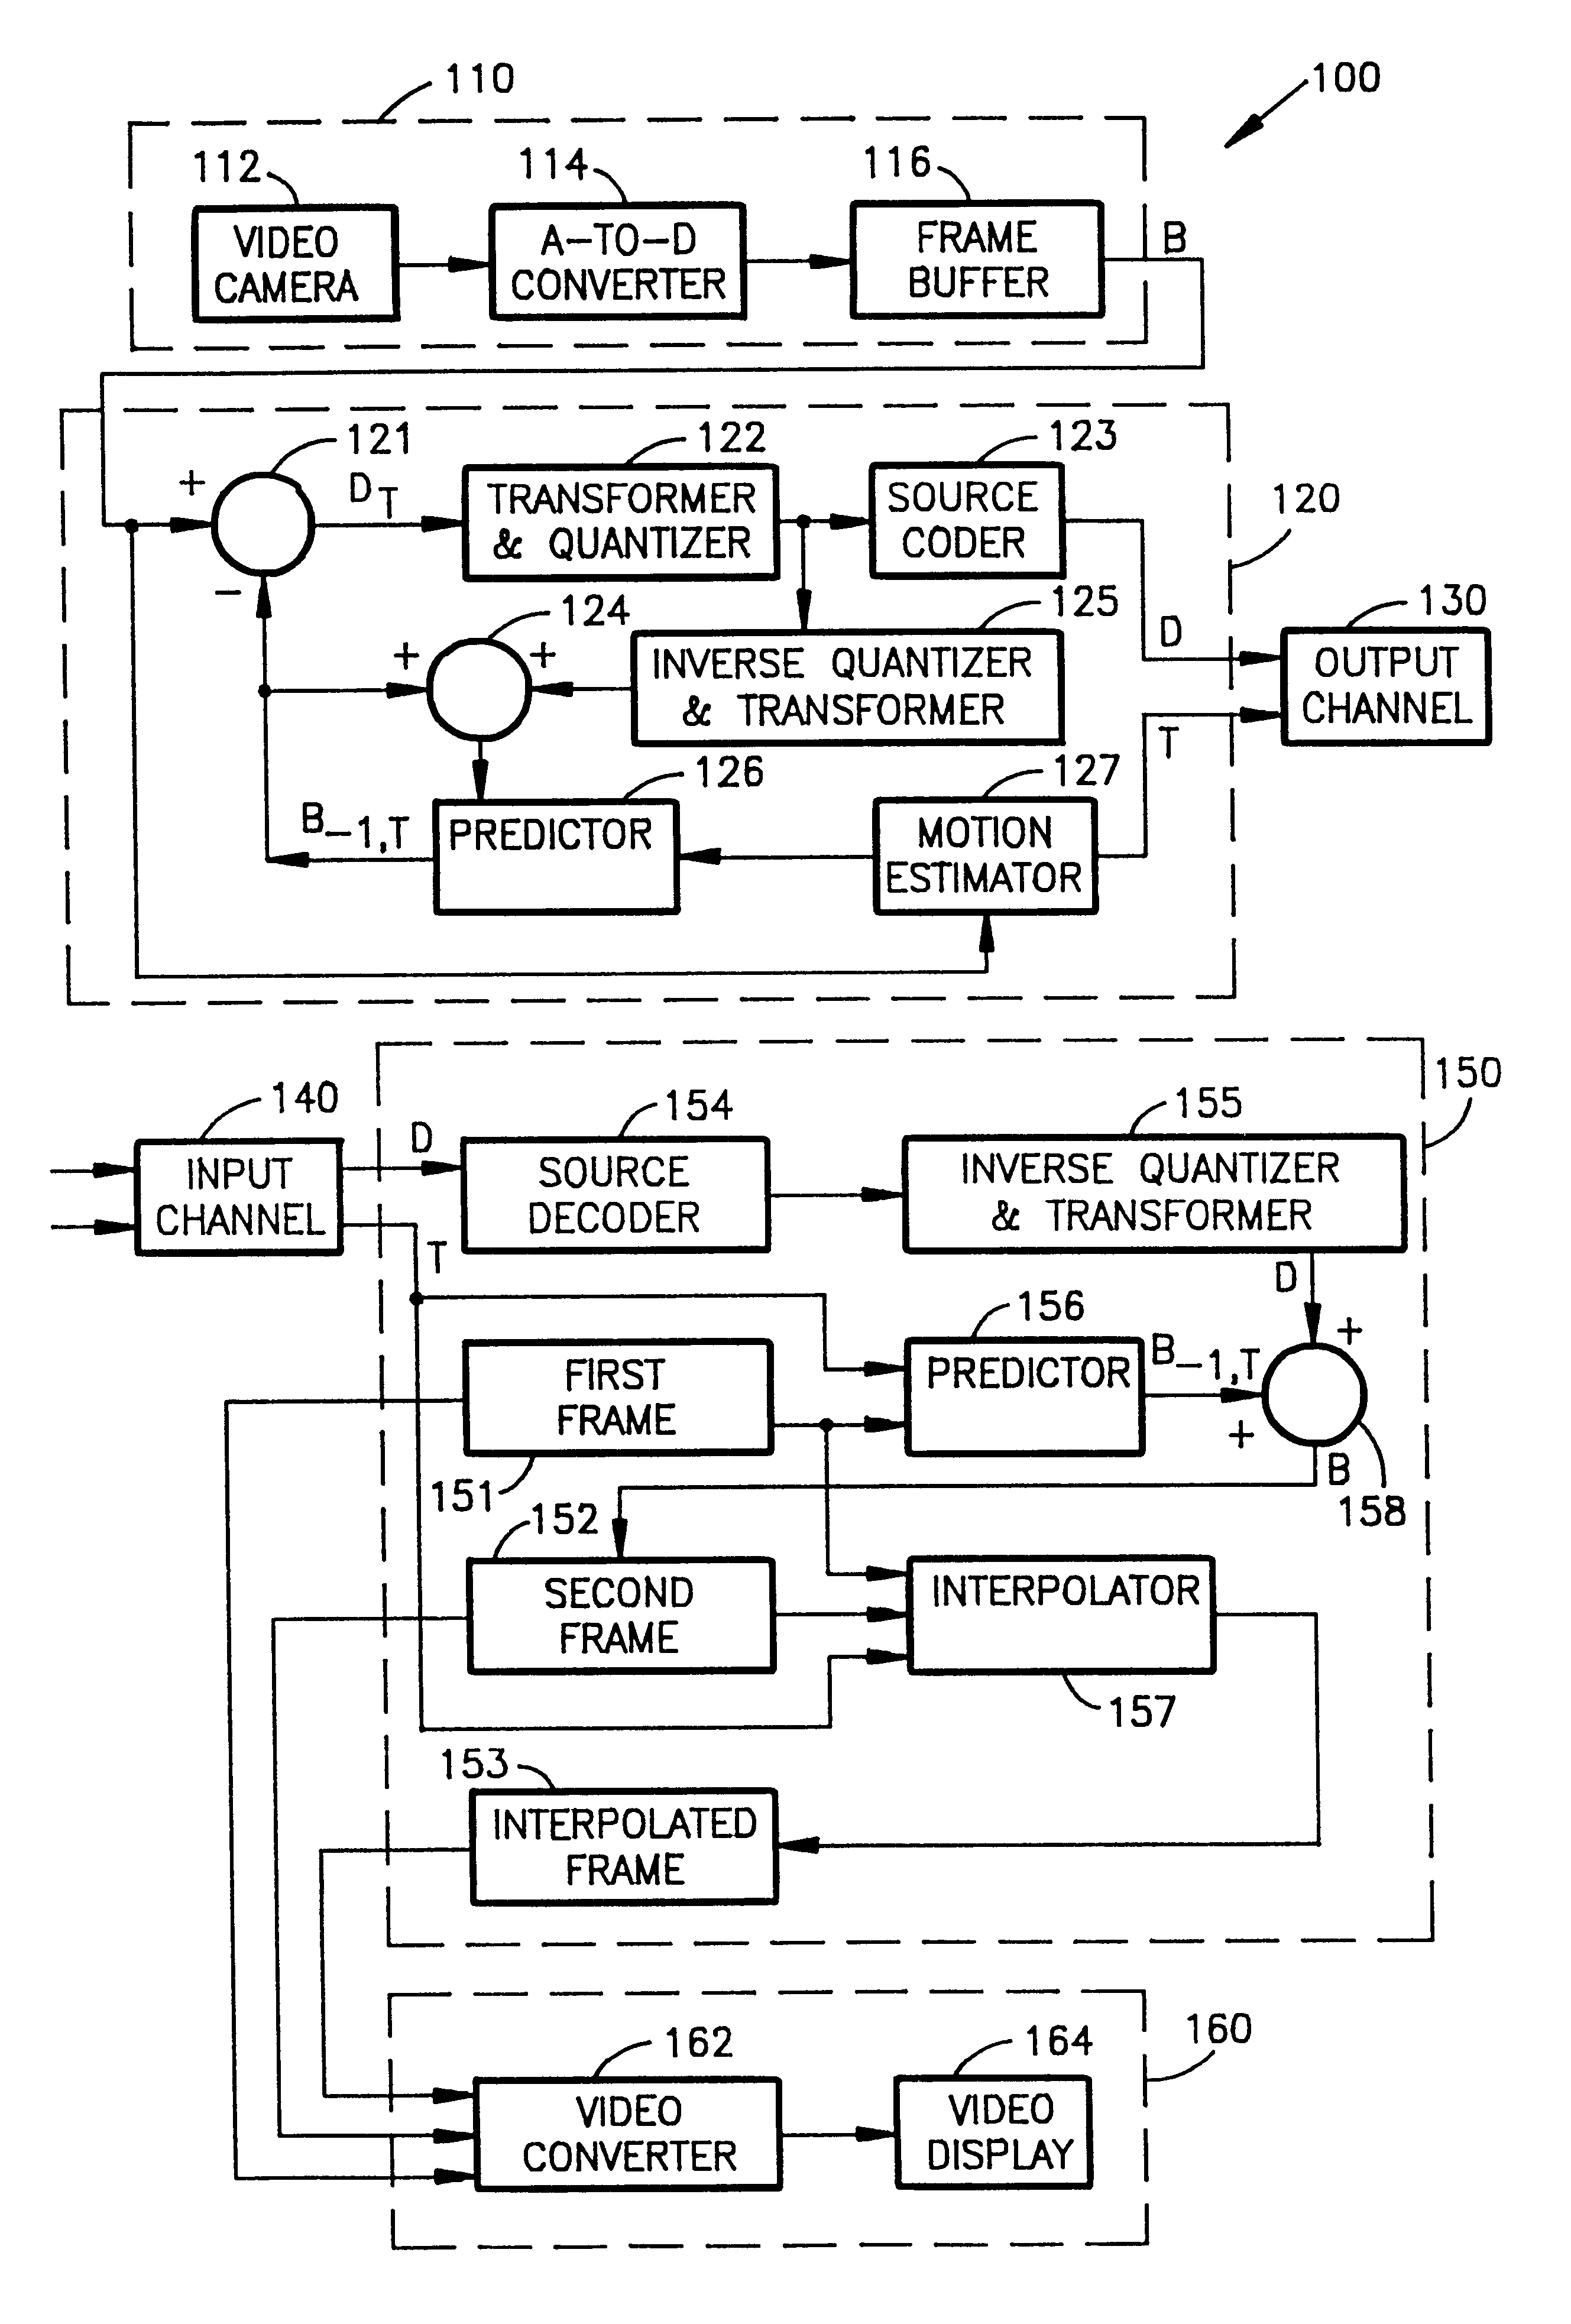 Motion vector based frame insertion process for increasing the frame rate of moving images